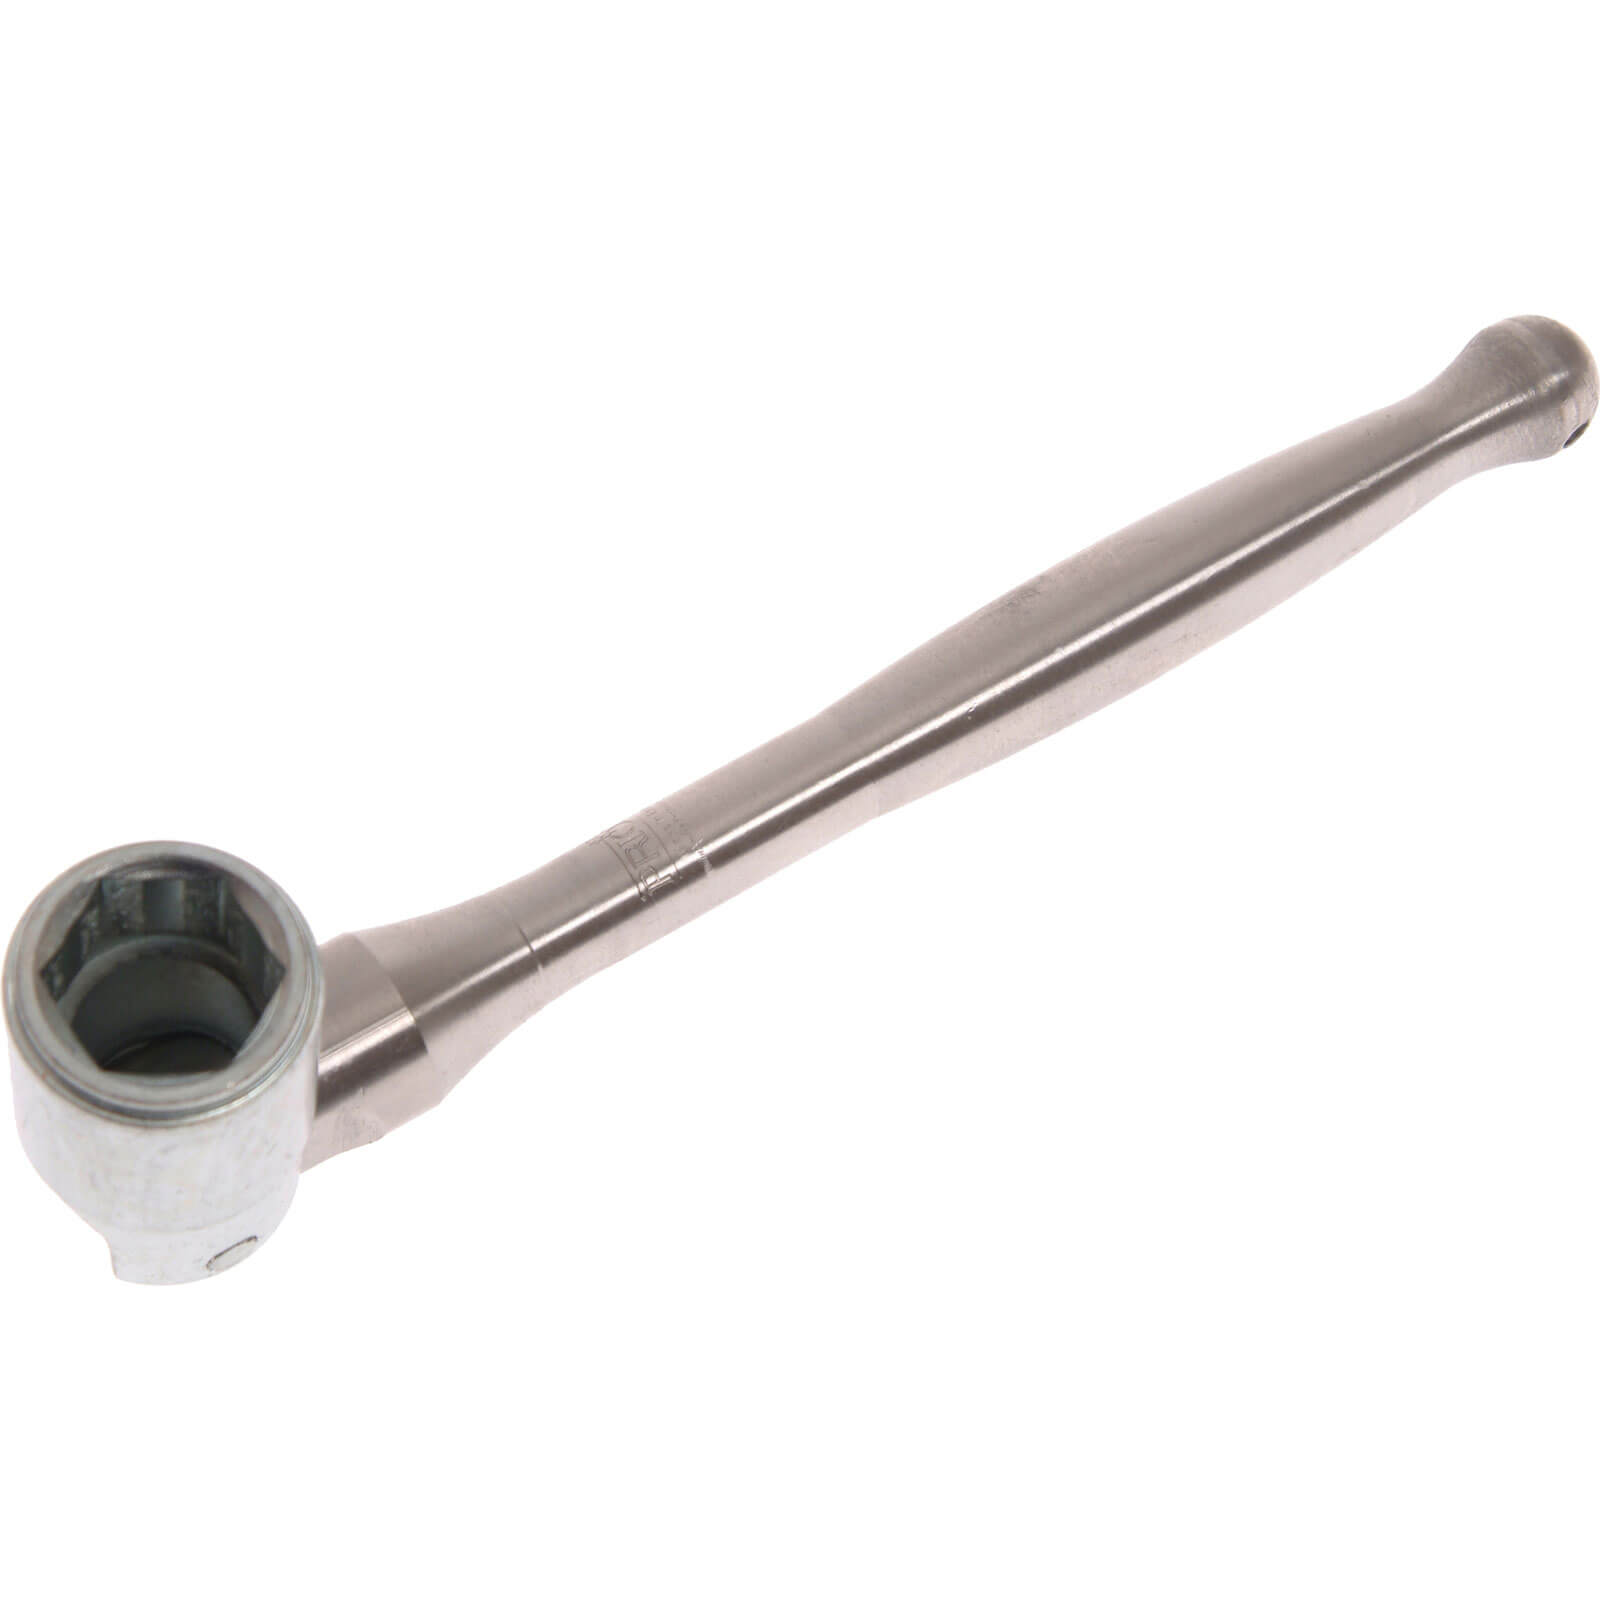 Image of Priory 380 Stainless Steel Scaffold Spanner Whitworth 7/16" Poker Steel Socket